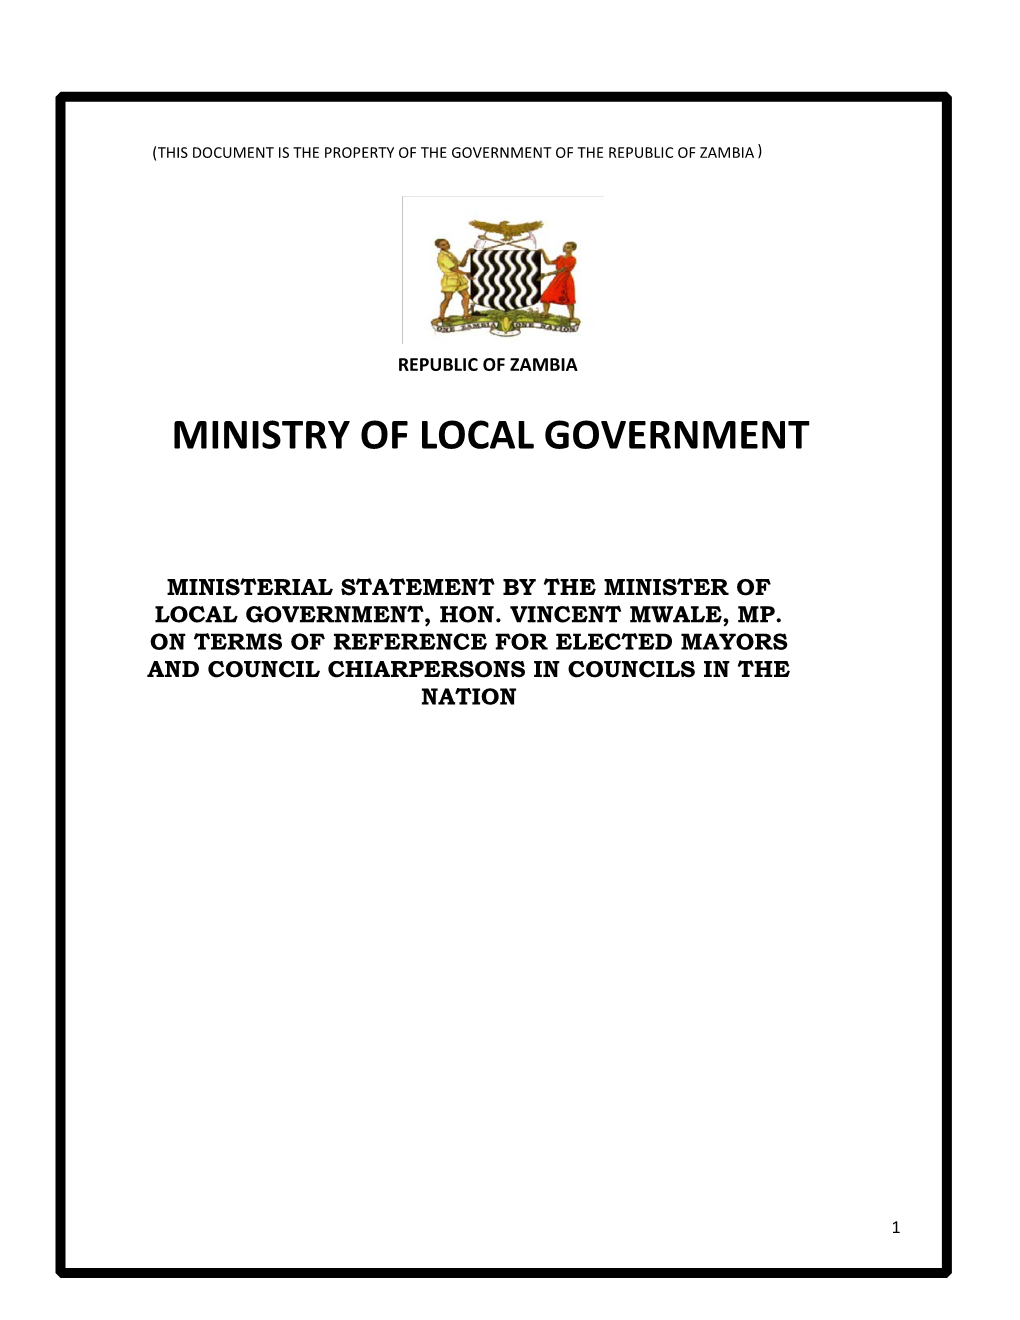 Ministry of Local Government